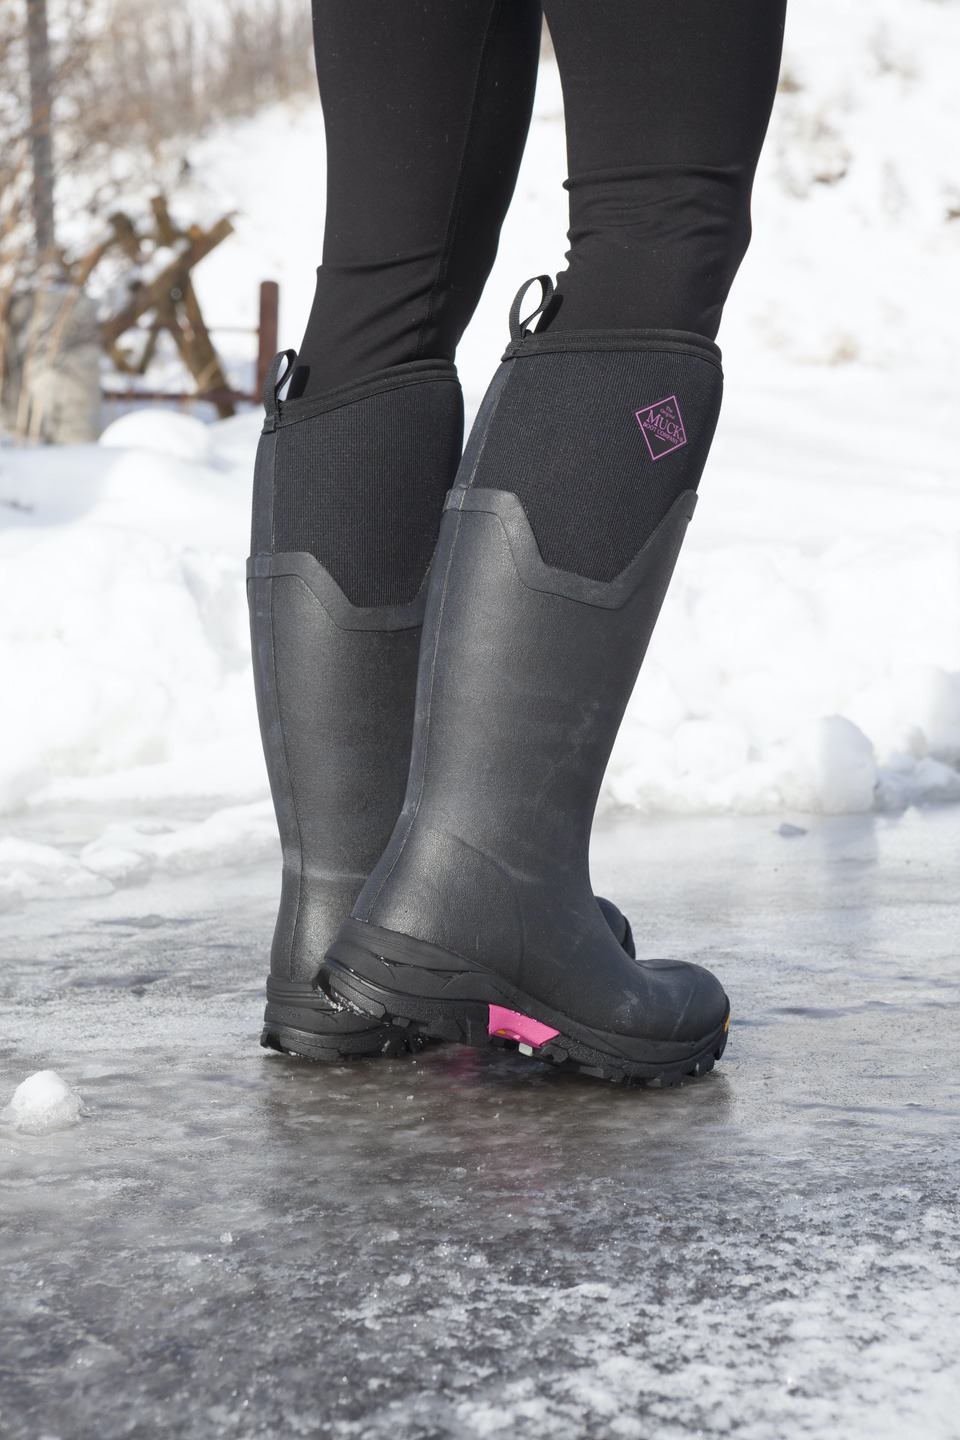 The Original Muck Boot Company Launches 